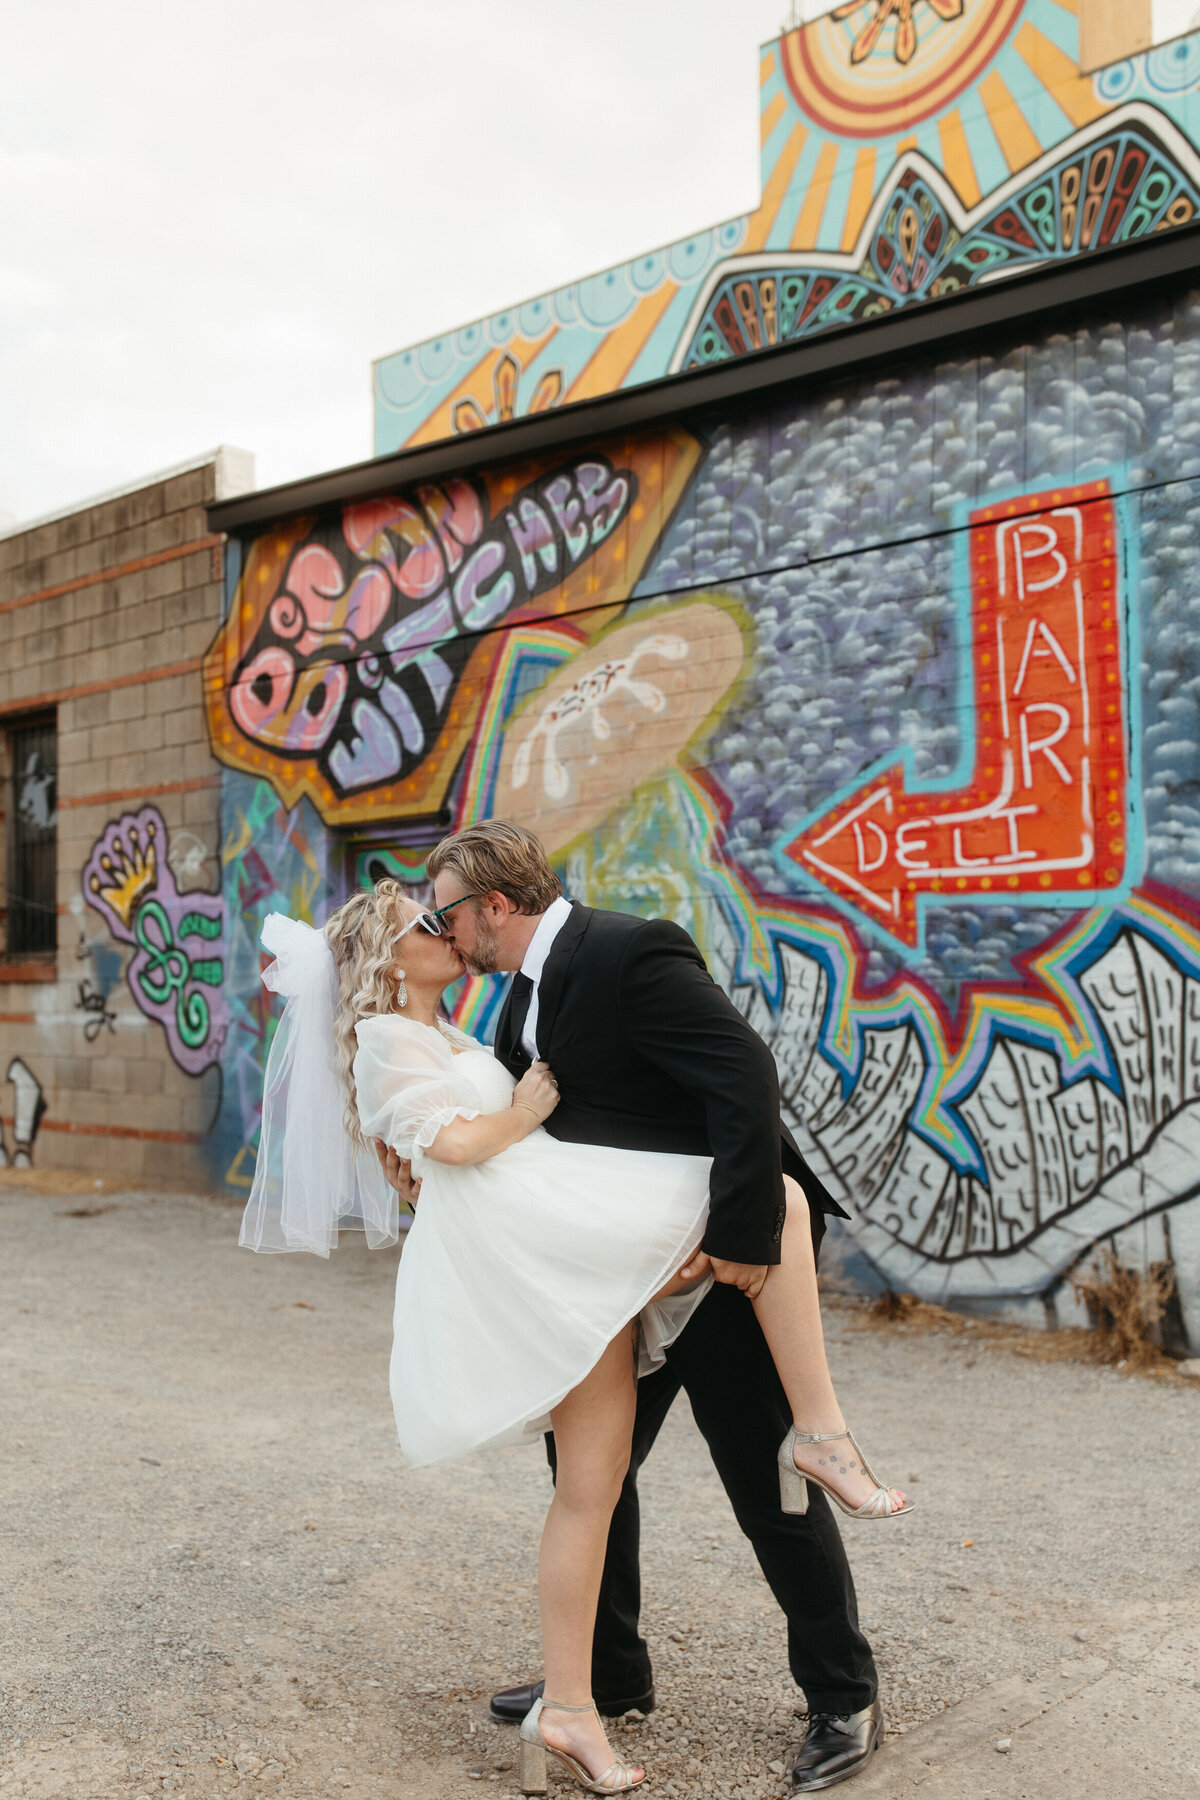 An exuberant couple in wedding attire sharing a kiss in front of a colorful graffiti wall